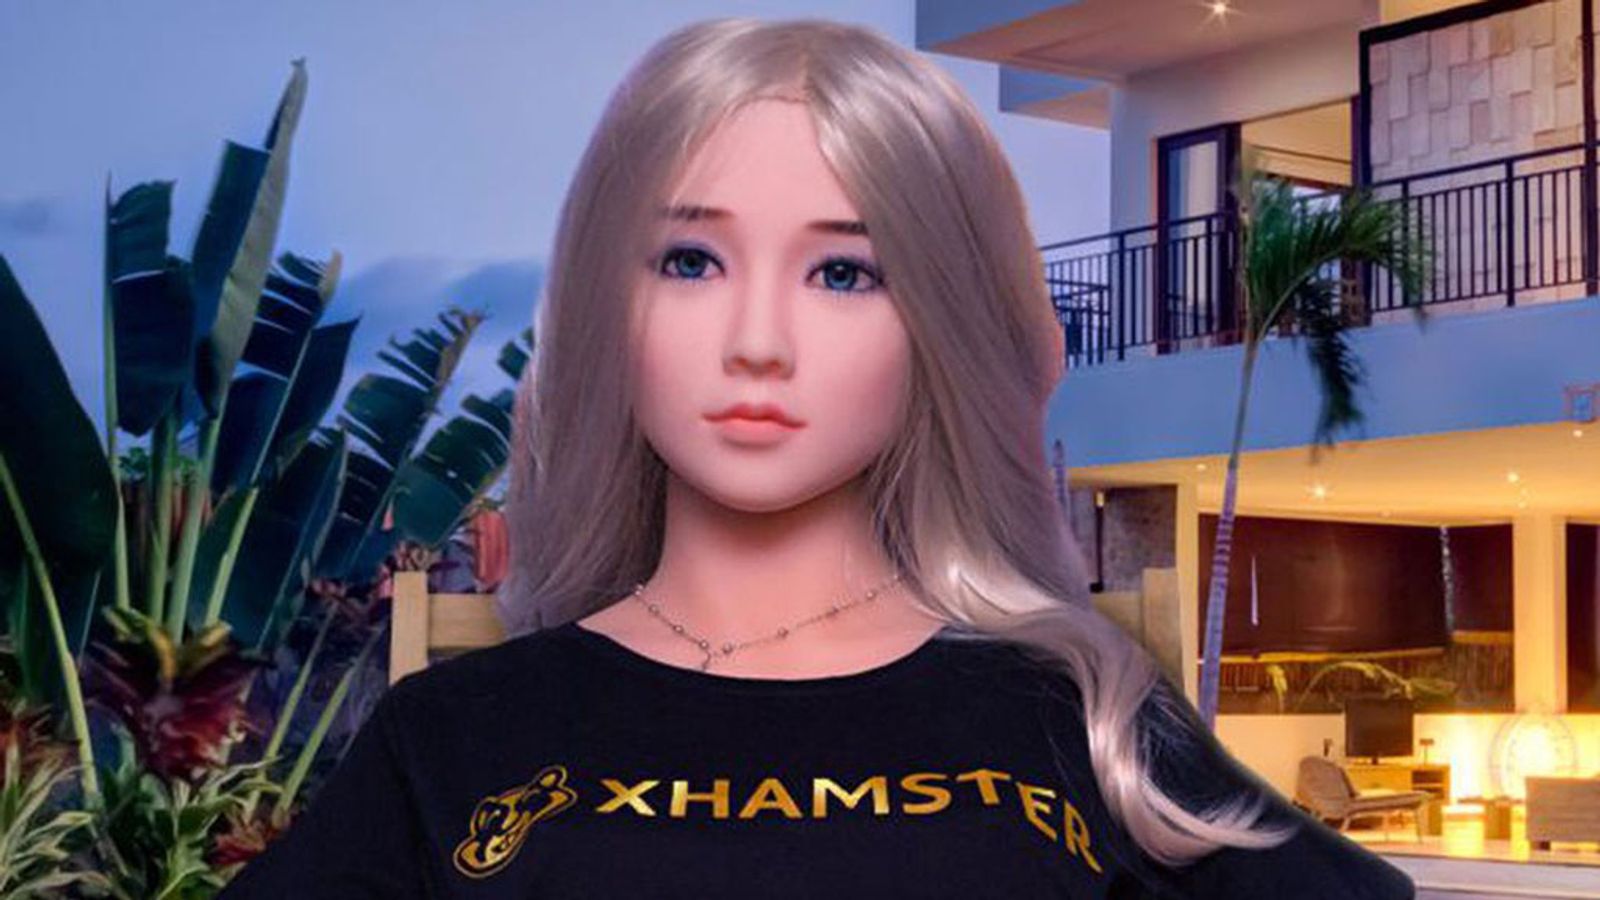 xHamster Seeking to Audition Sex Robots for Future Productions